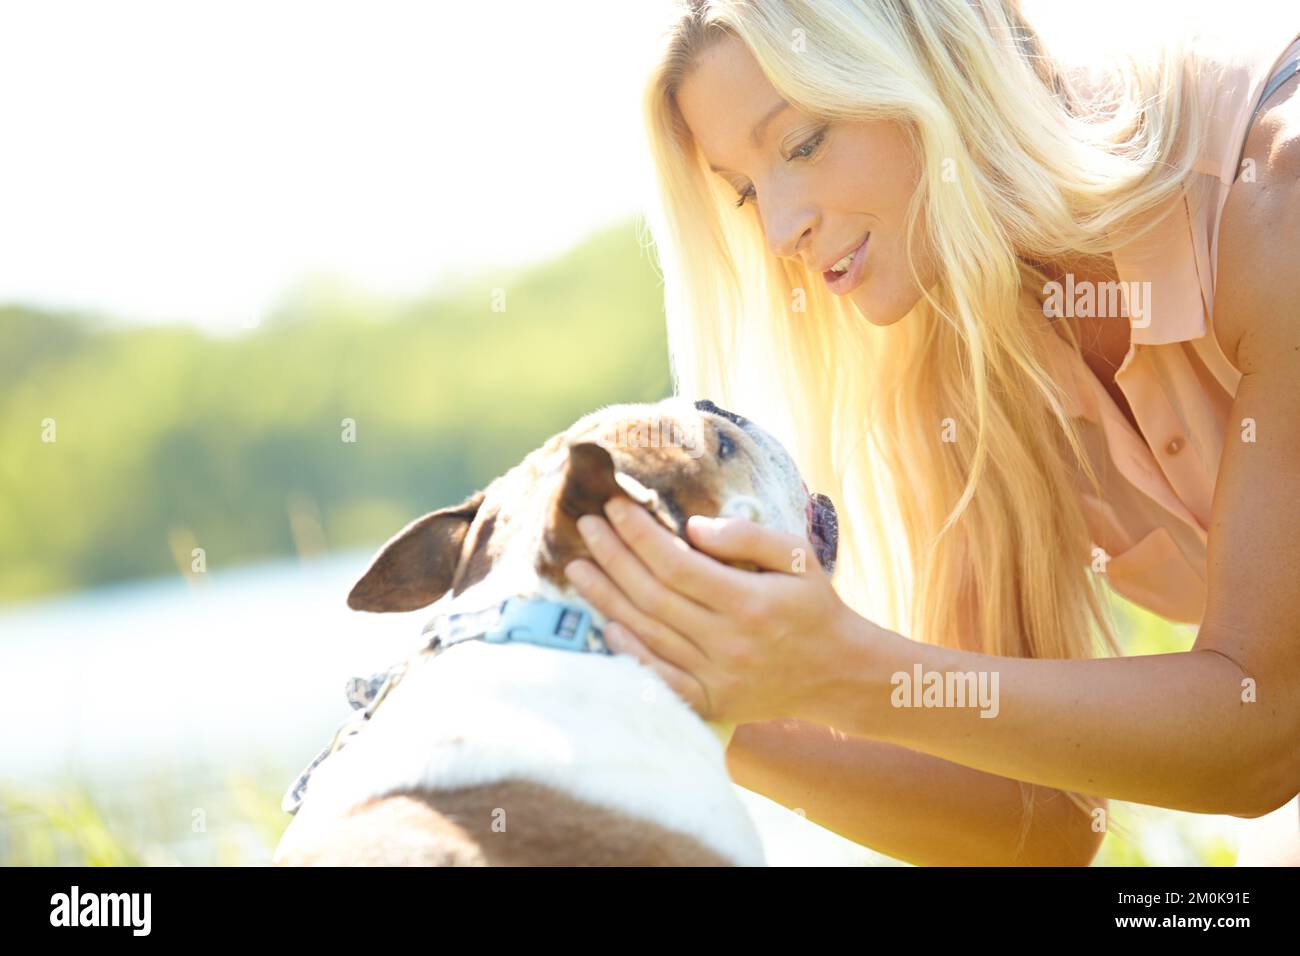 Sharing a moment with my best friend. A beautiful blonde talking to her dog in a meadow. Stock Photo